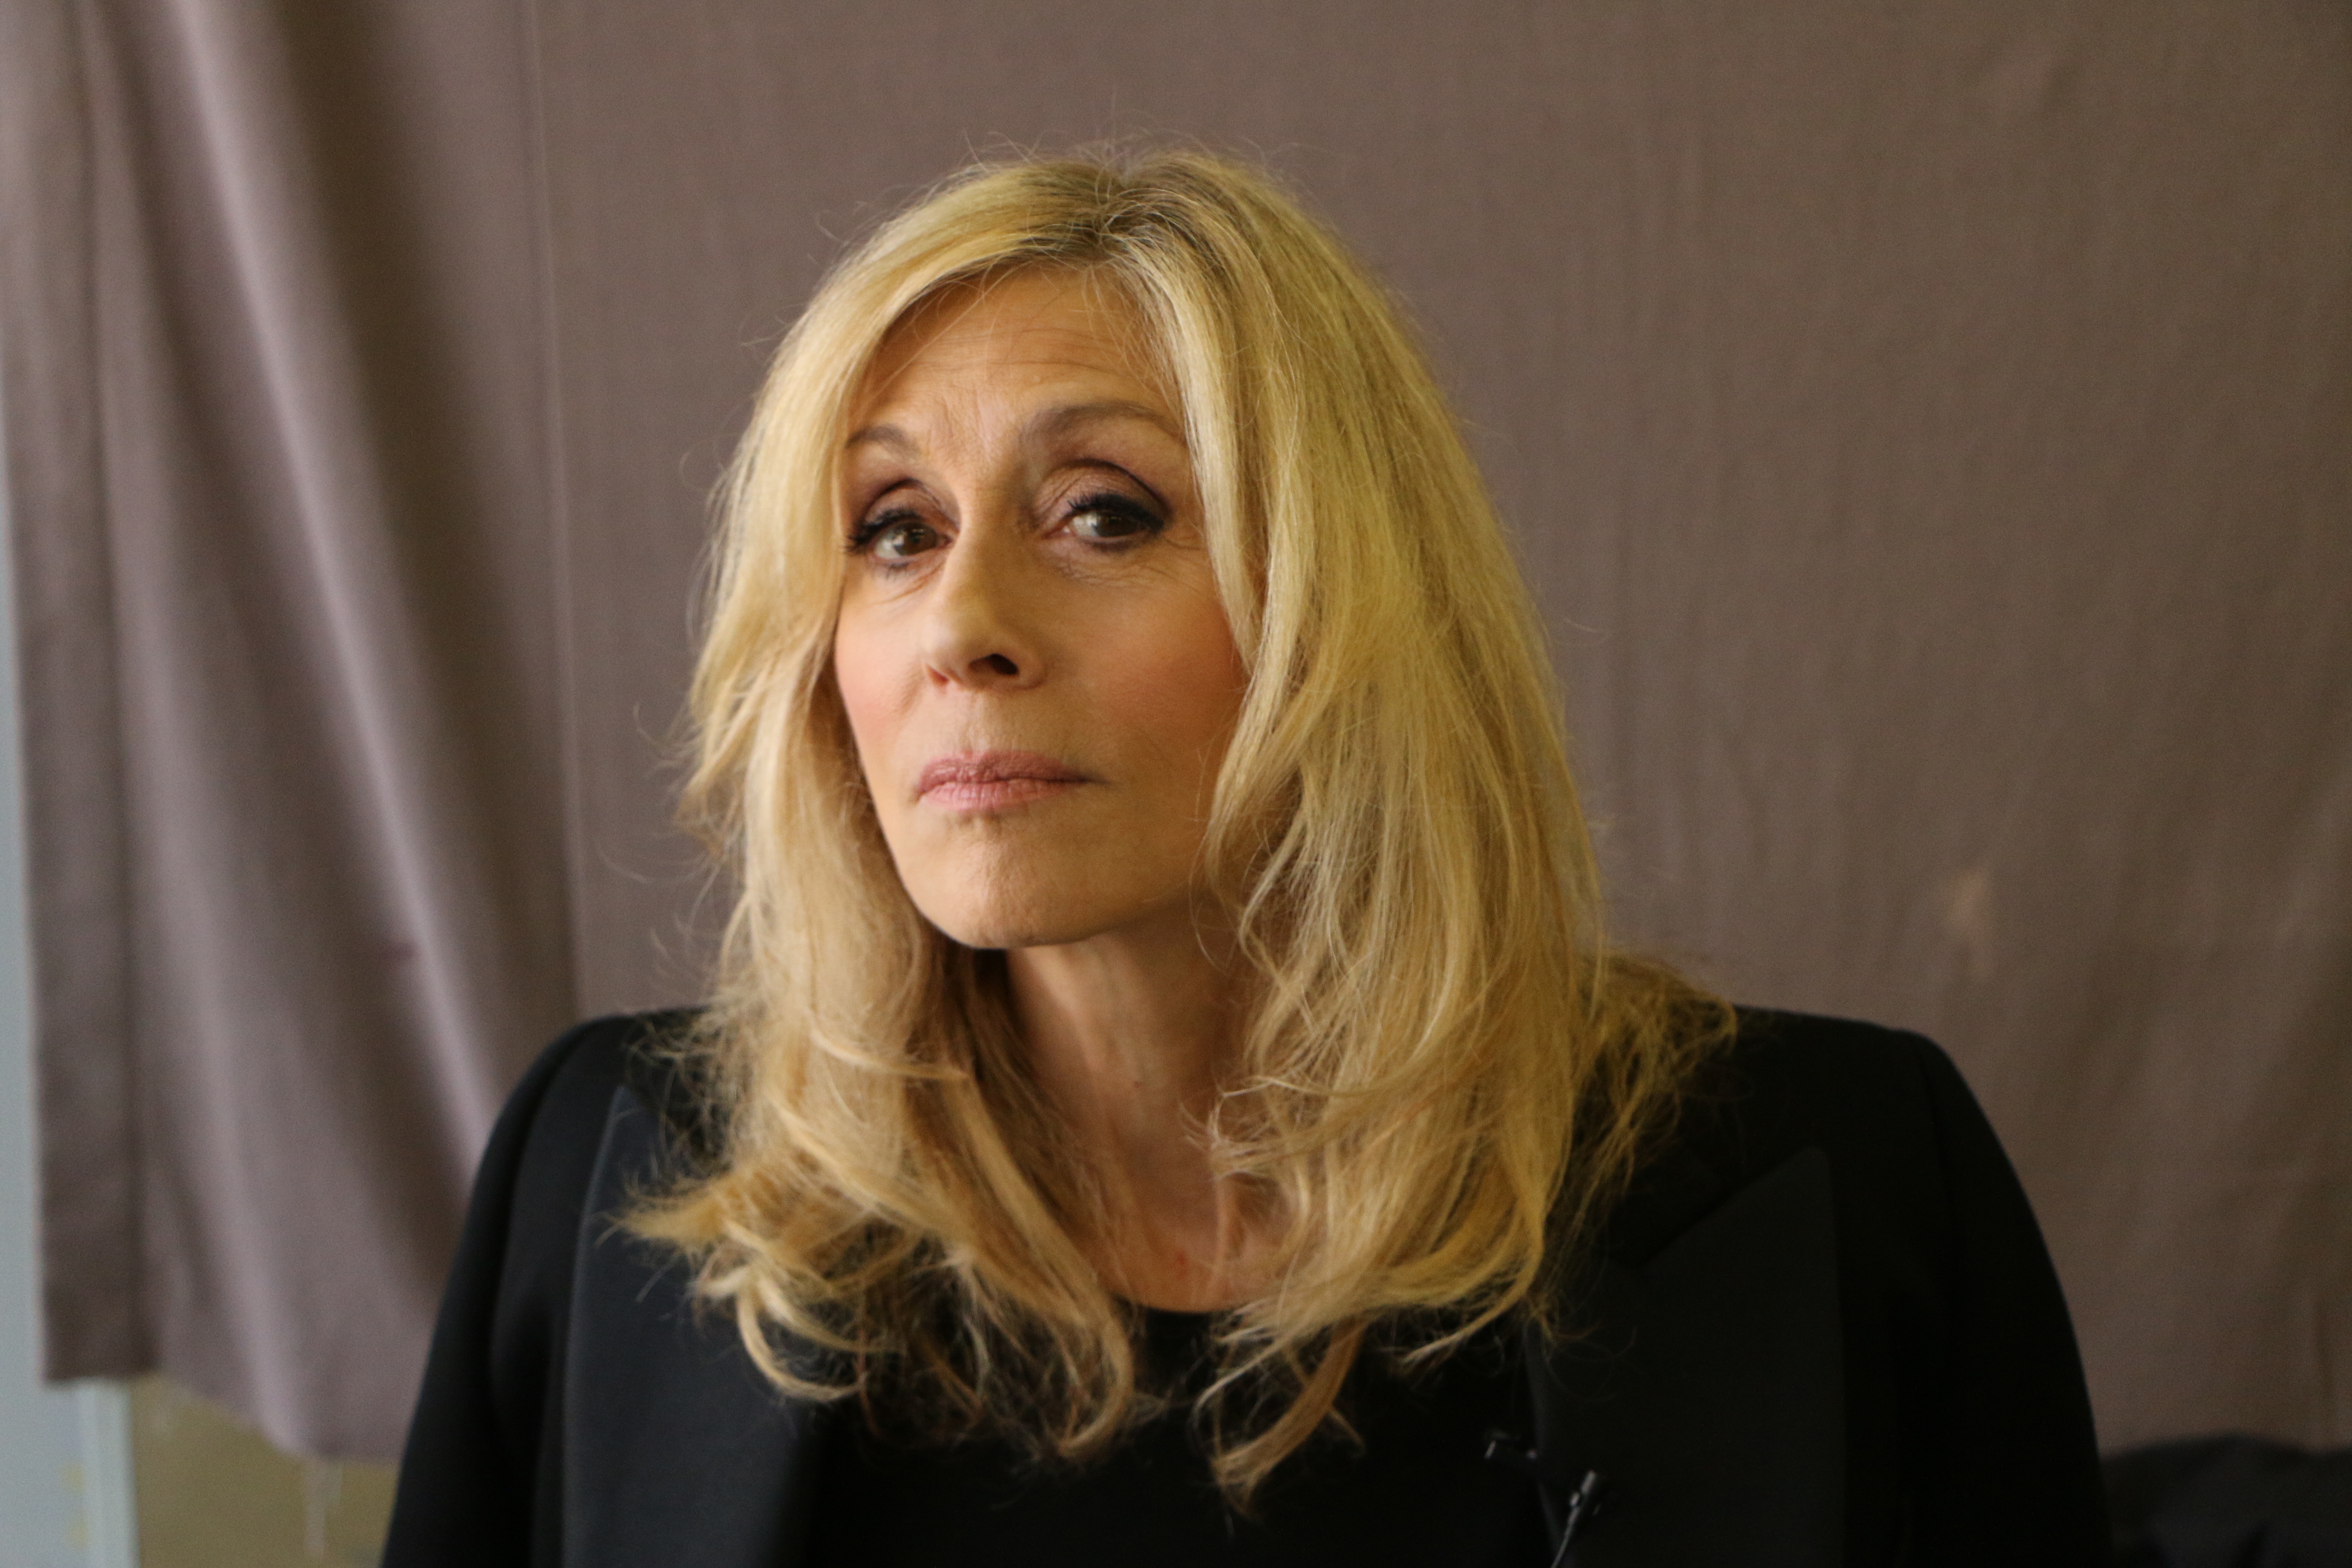 Sneak Preview: Judith Light Stars in ‘All the Ways to Say I Love You’